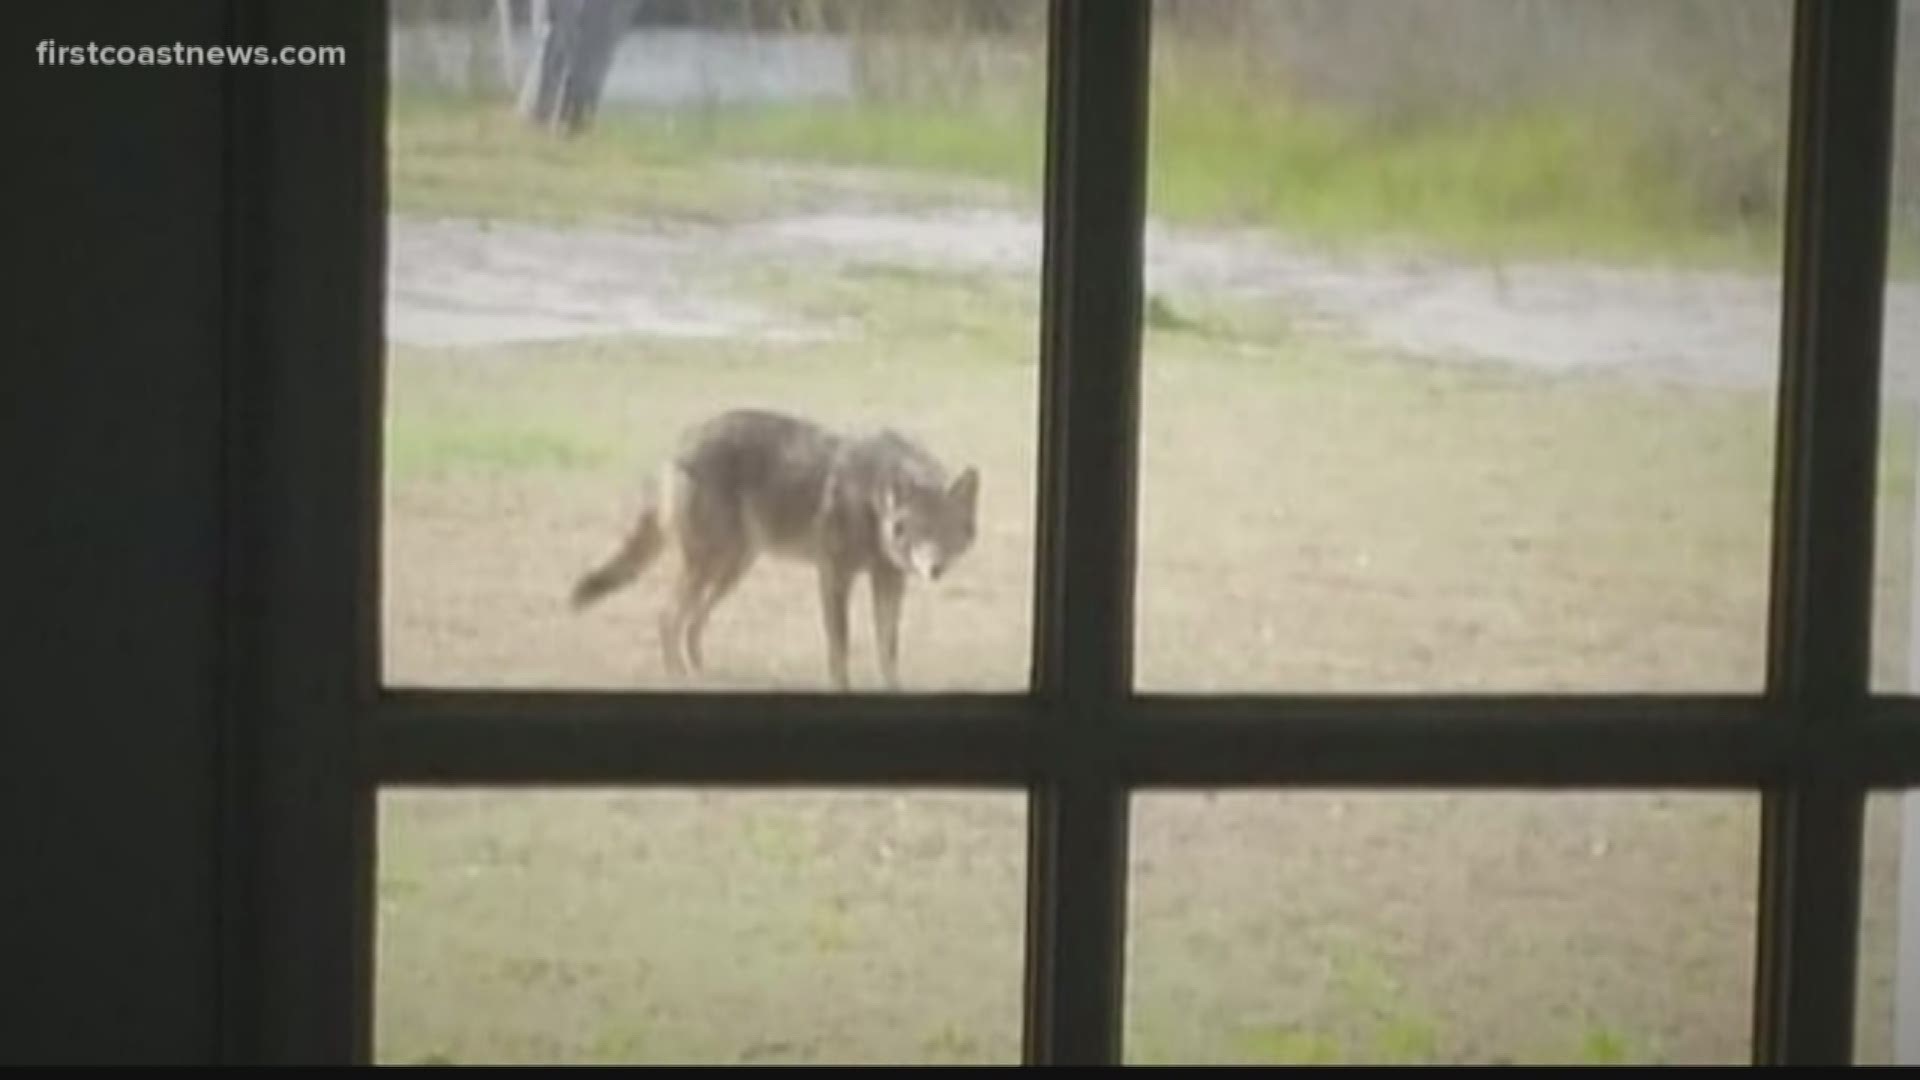 About 80 cats have gone missing as coyote sightings continue to increase, according to an Atlantic Beach resident.